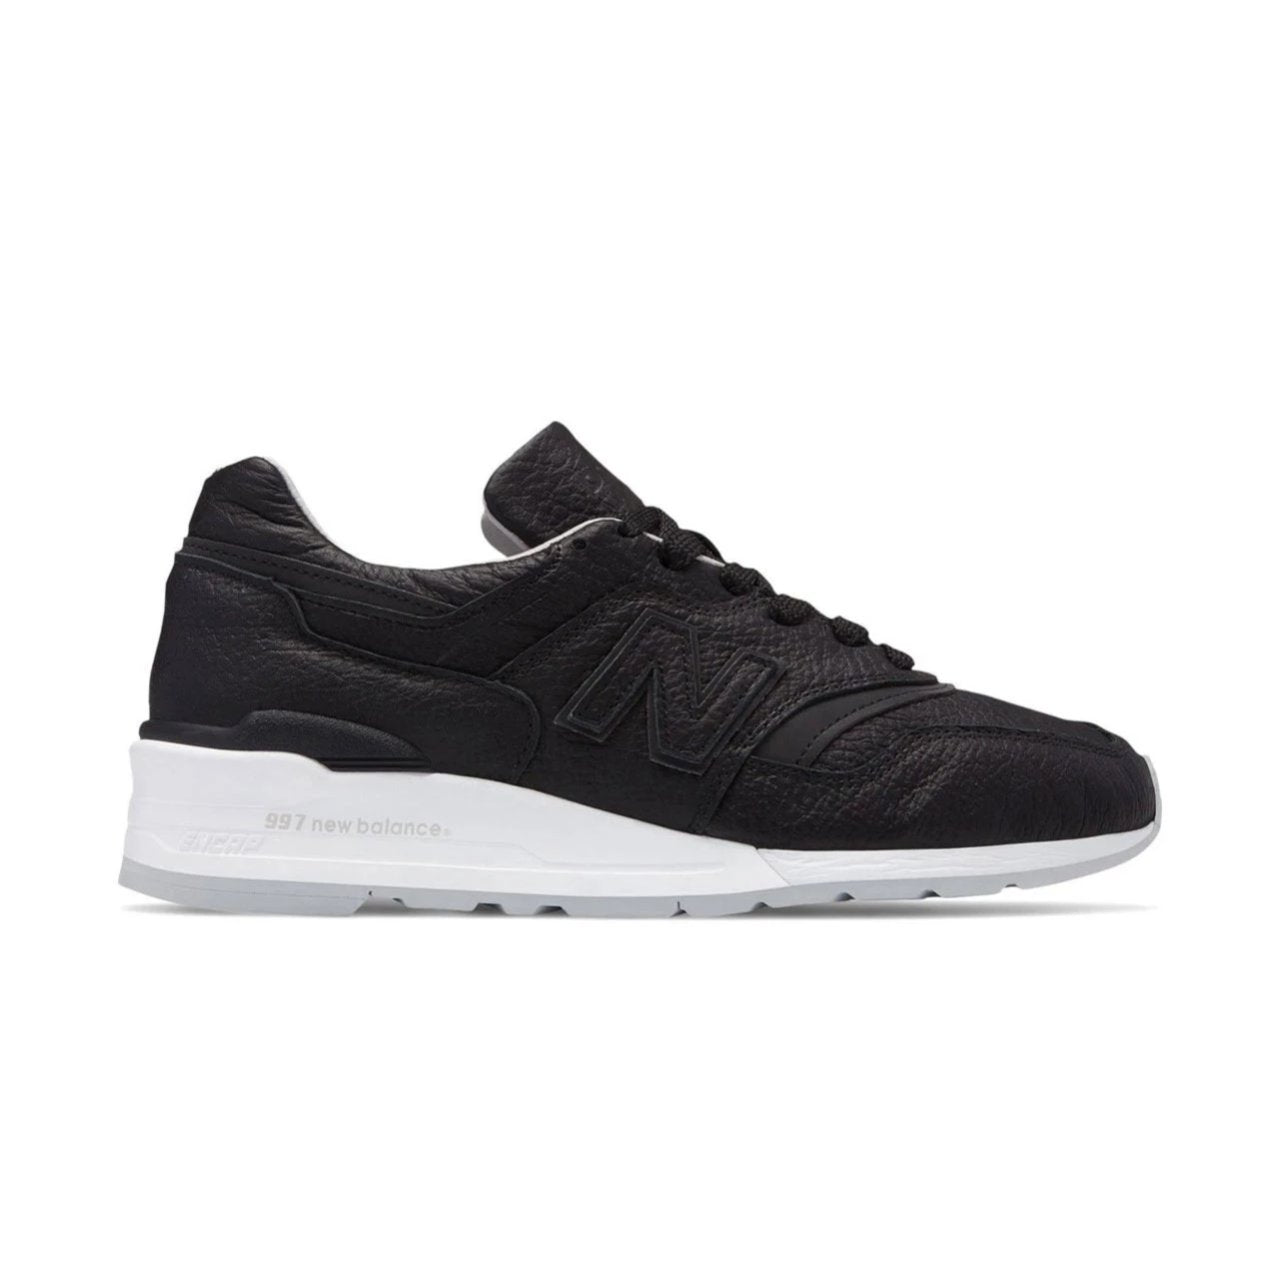 New Balance 997 Bison Made in USA Sneaker | Uncrate